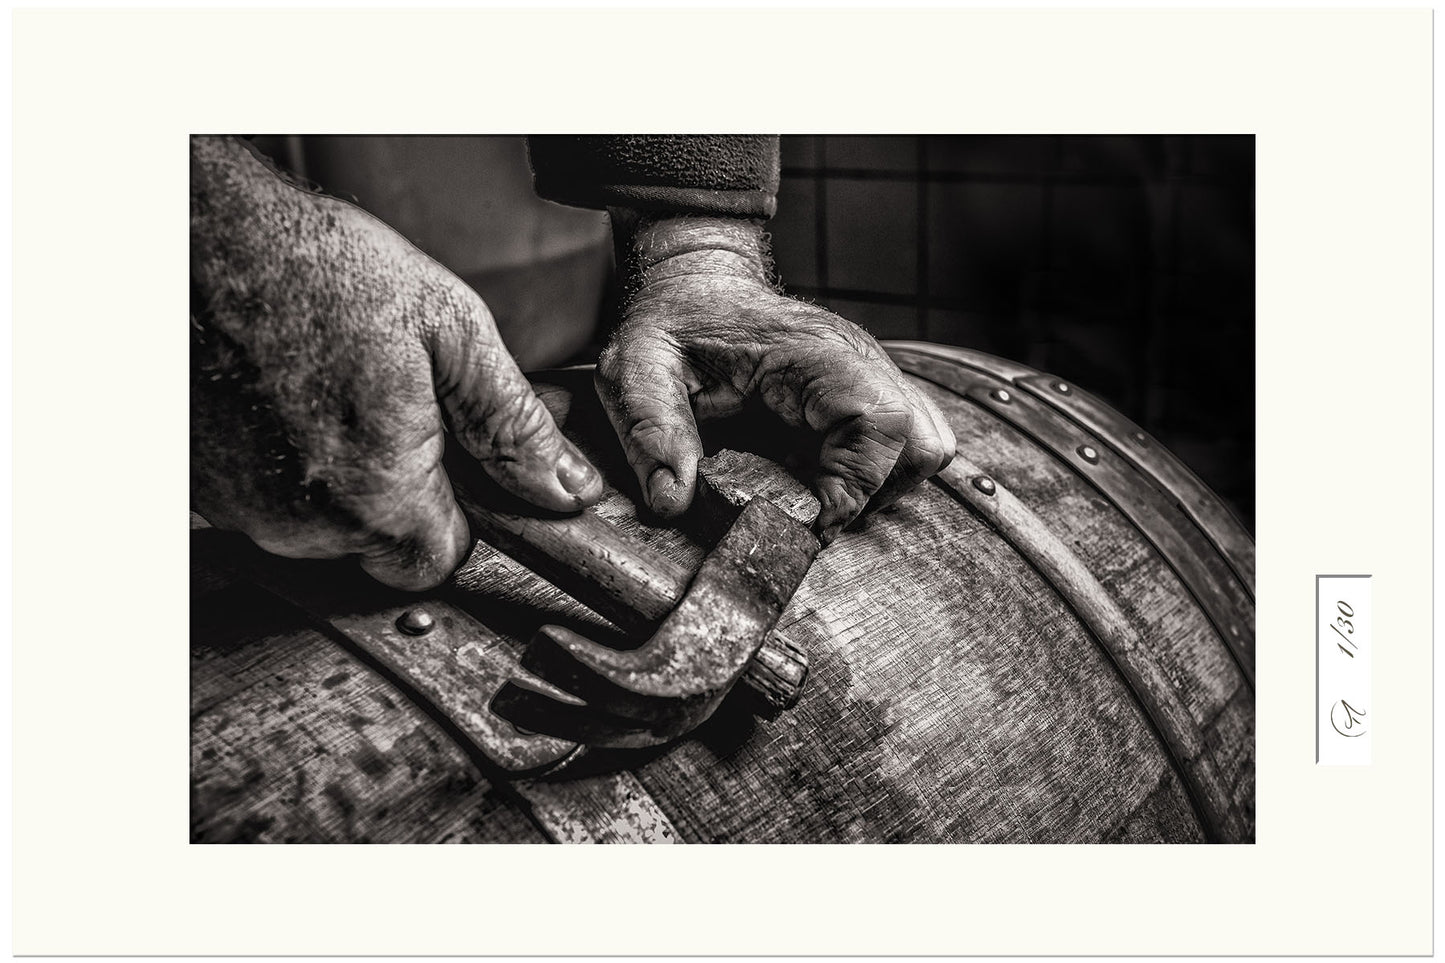 The March Edition | We introduce the Artisans of Champagne